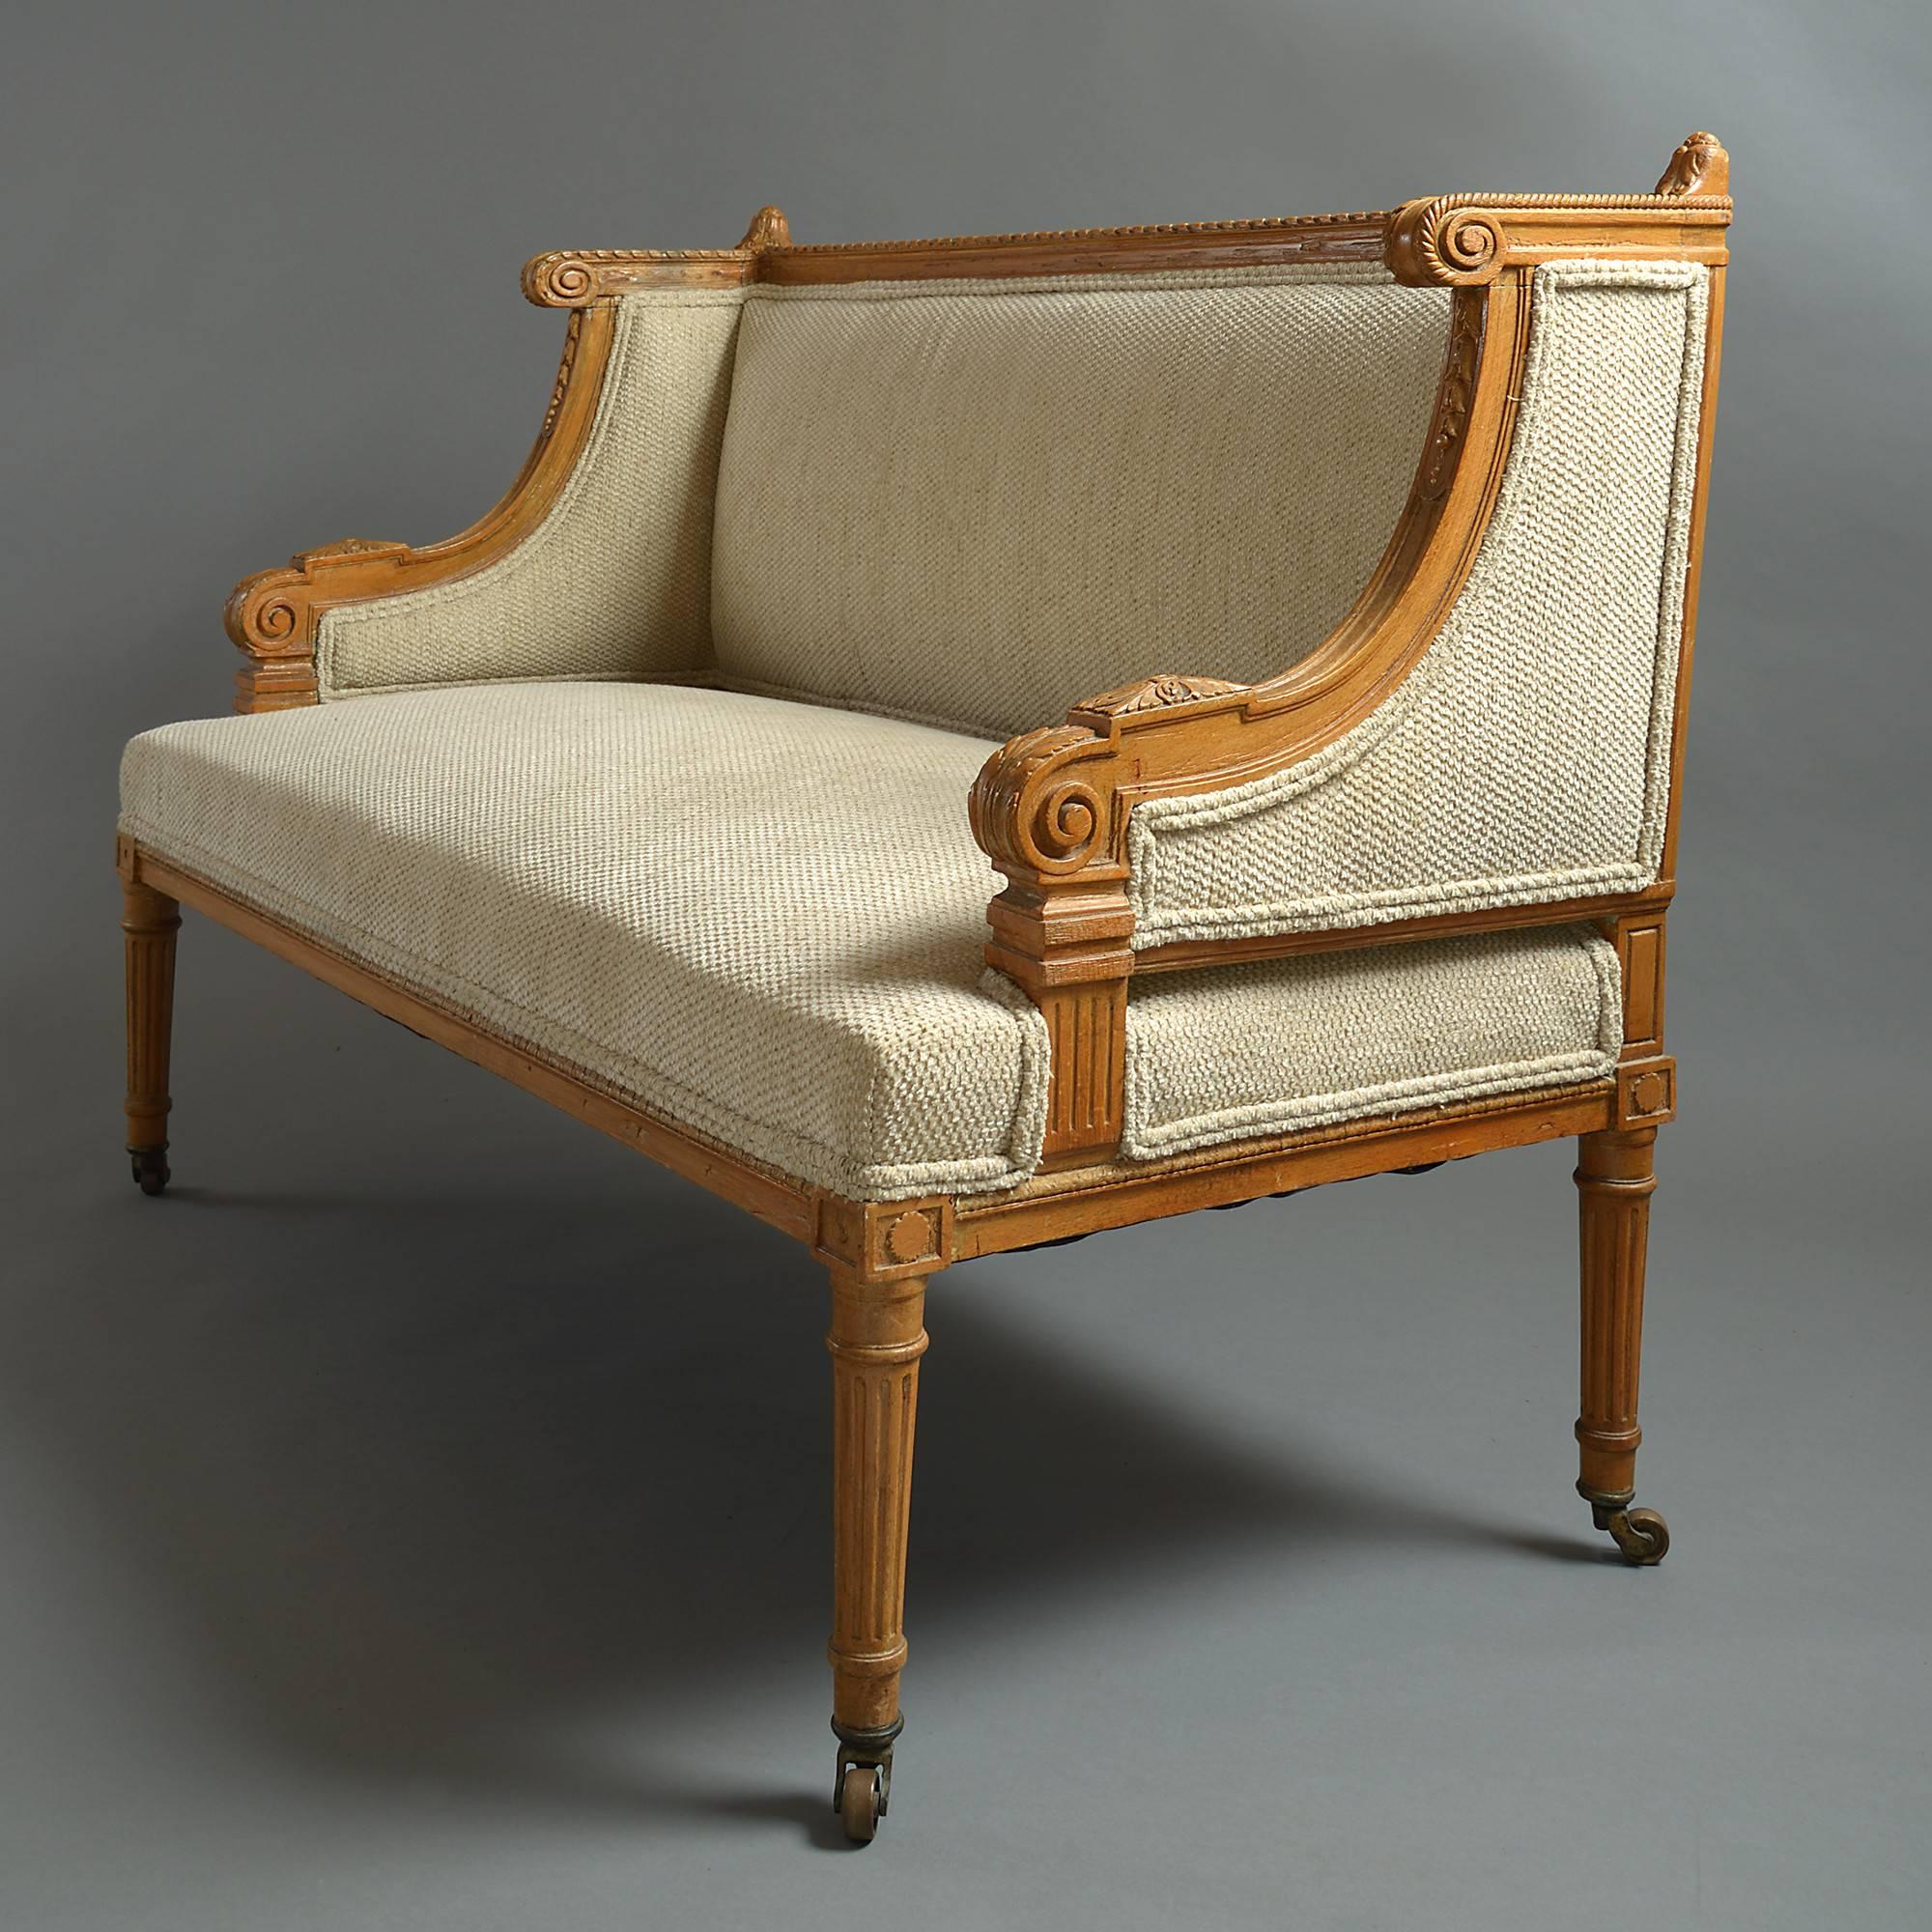 French 19th Century Louis XVI Style Carved Beechwood Canapé or Sofa